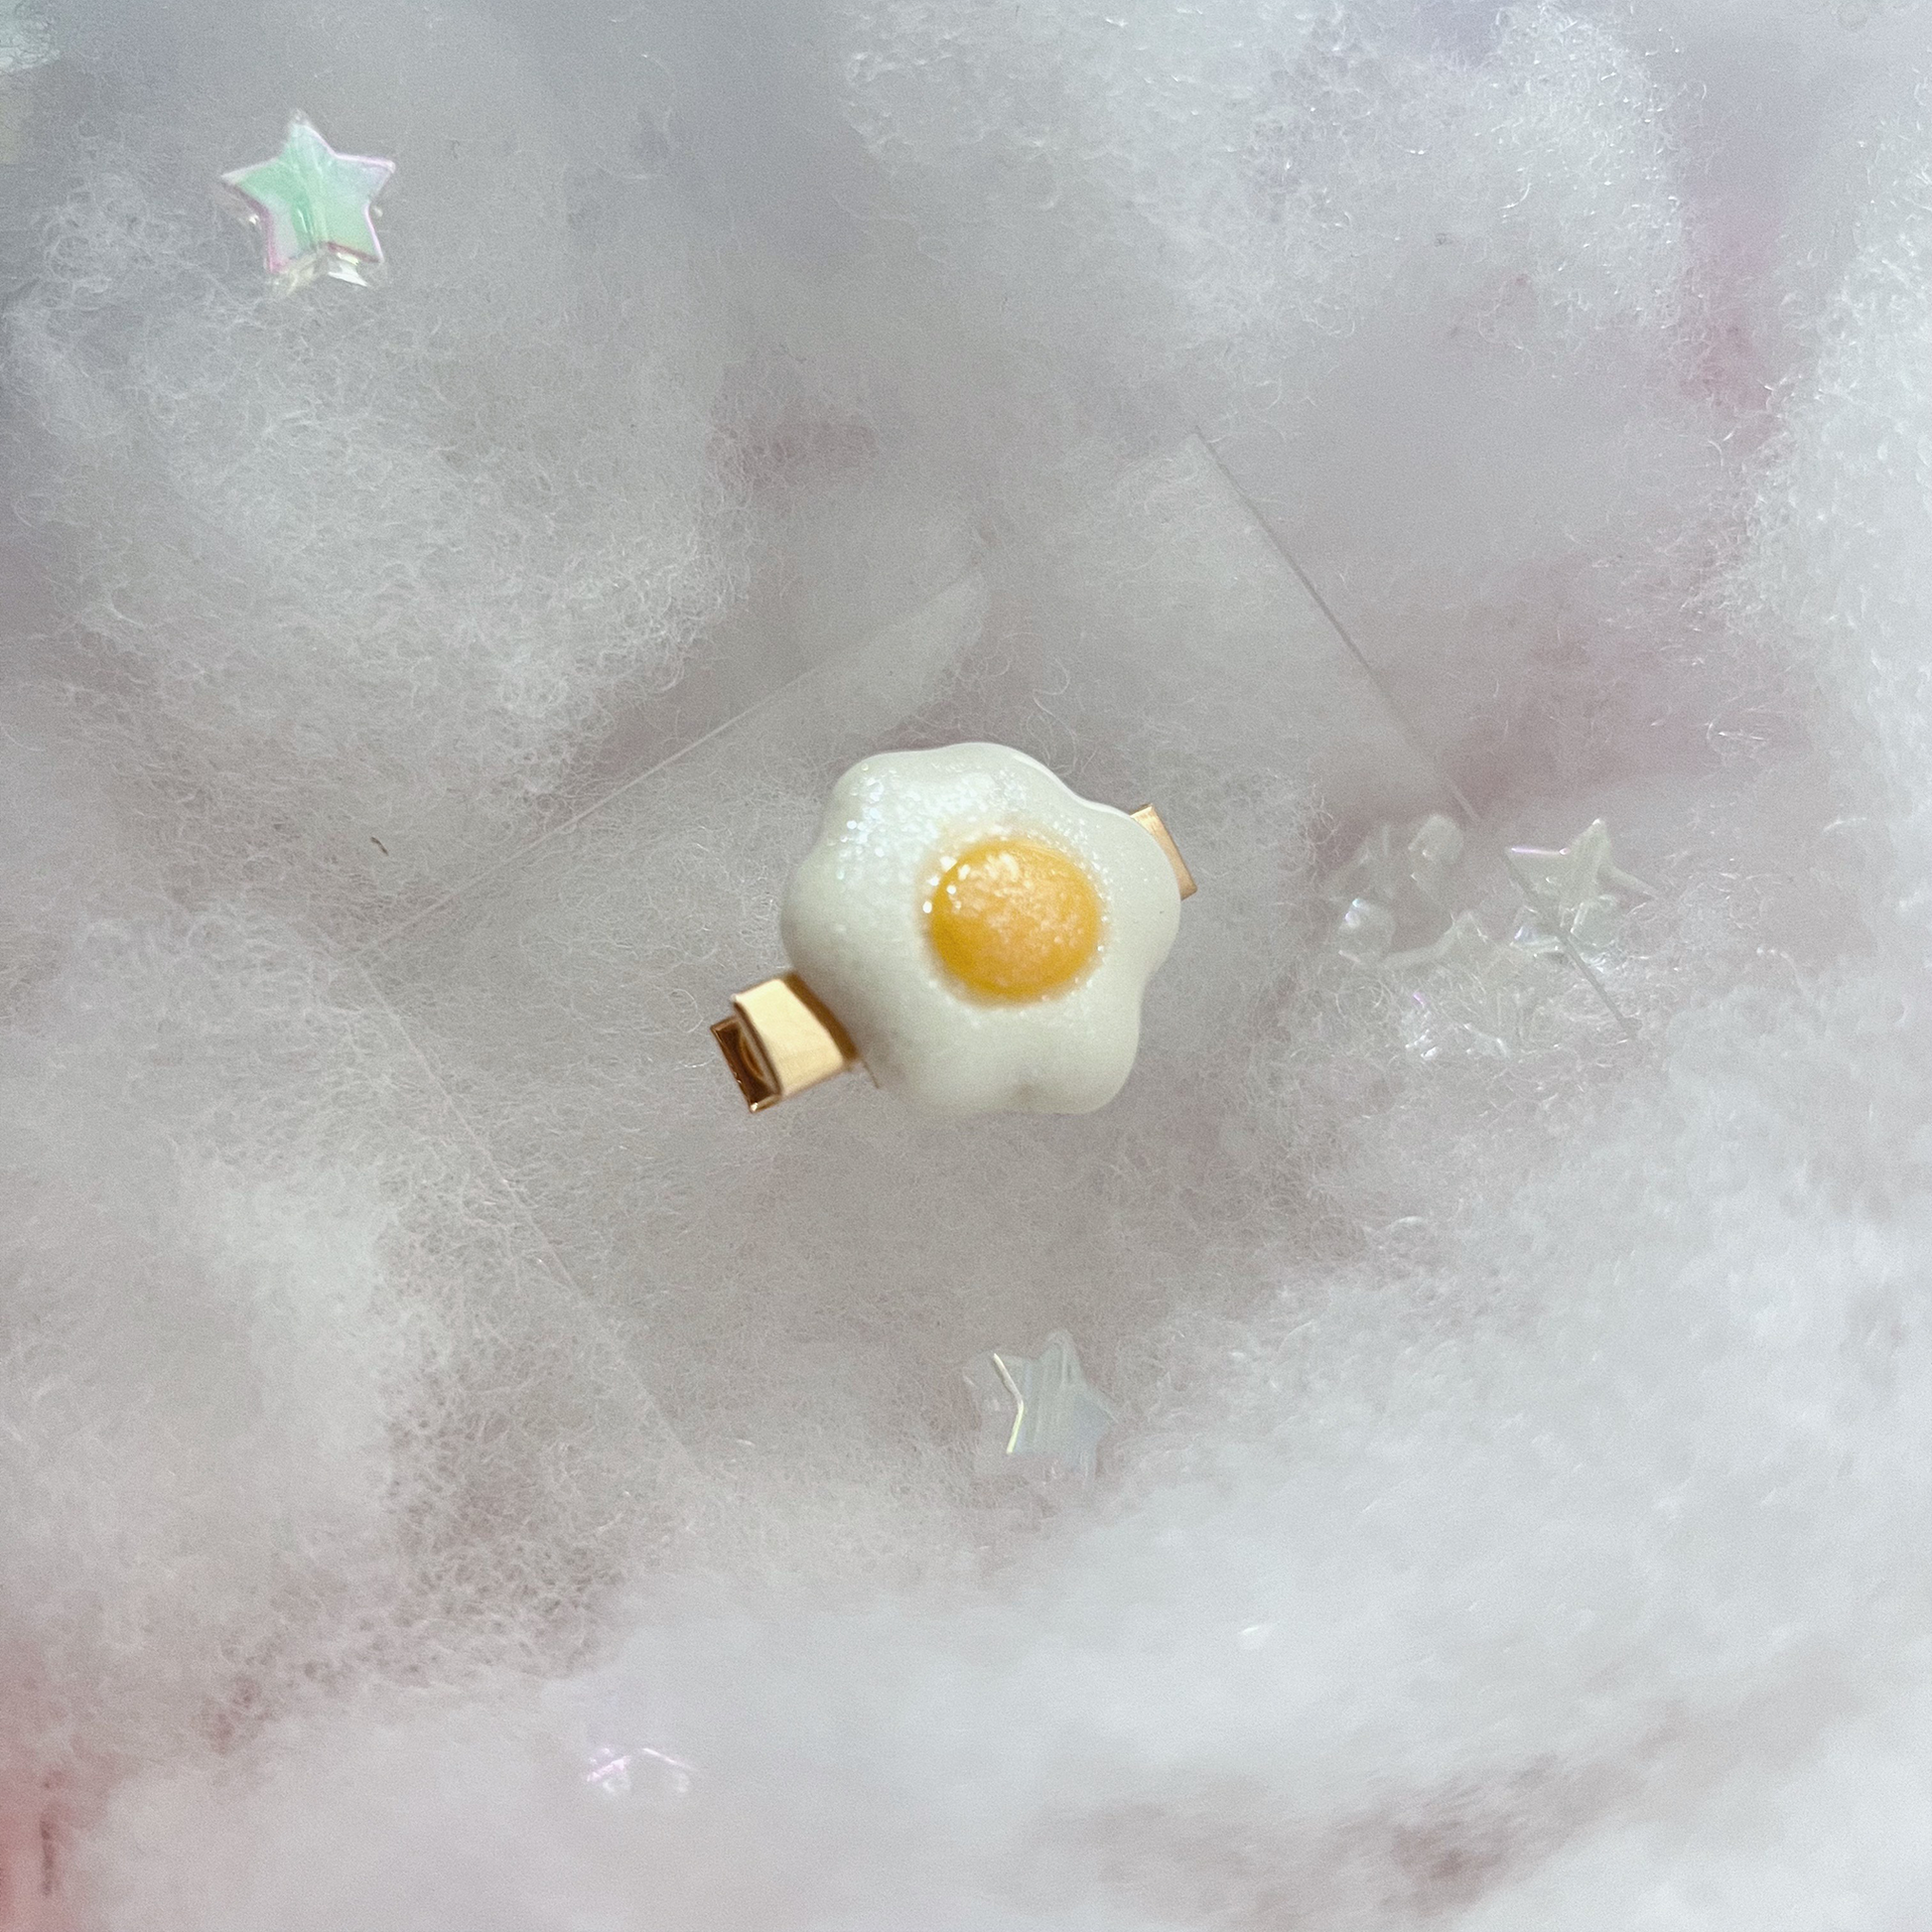 Small eggie hair clip in a dreamy white cloud background.